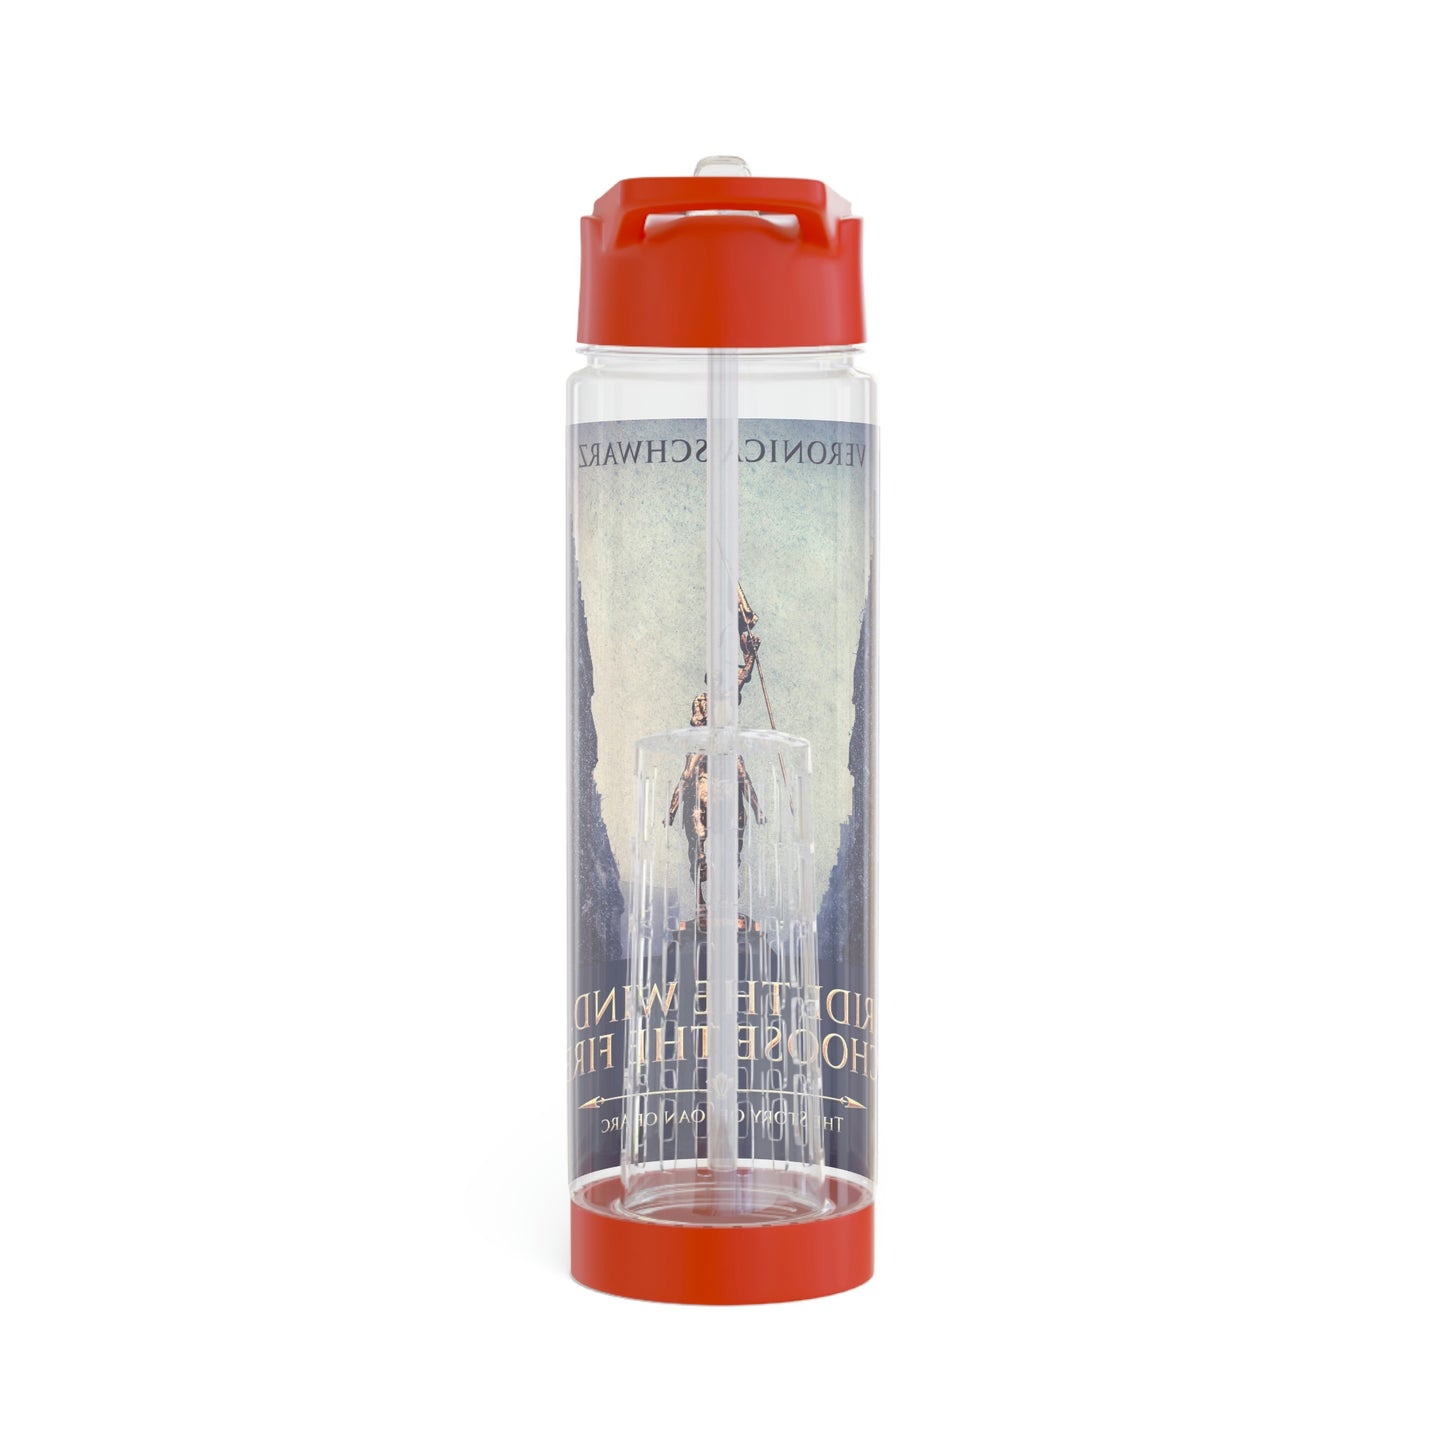 Ride The Wind, Choose The Fire - Infuser Water Bottle